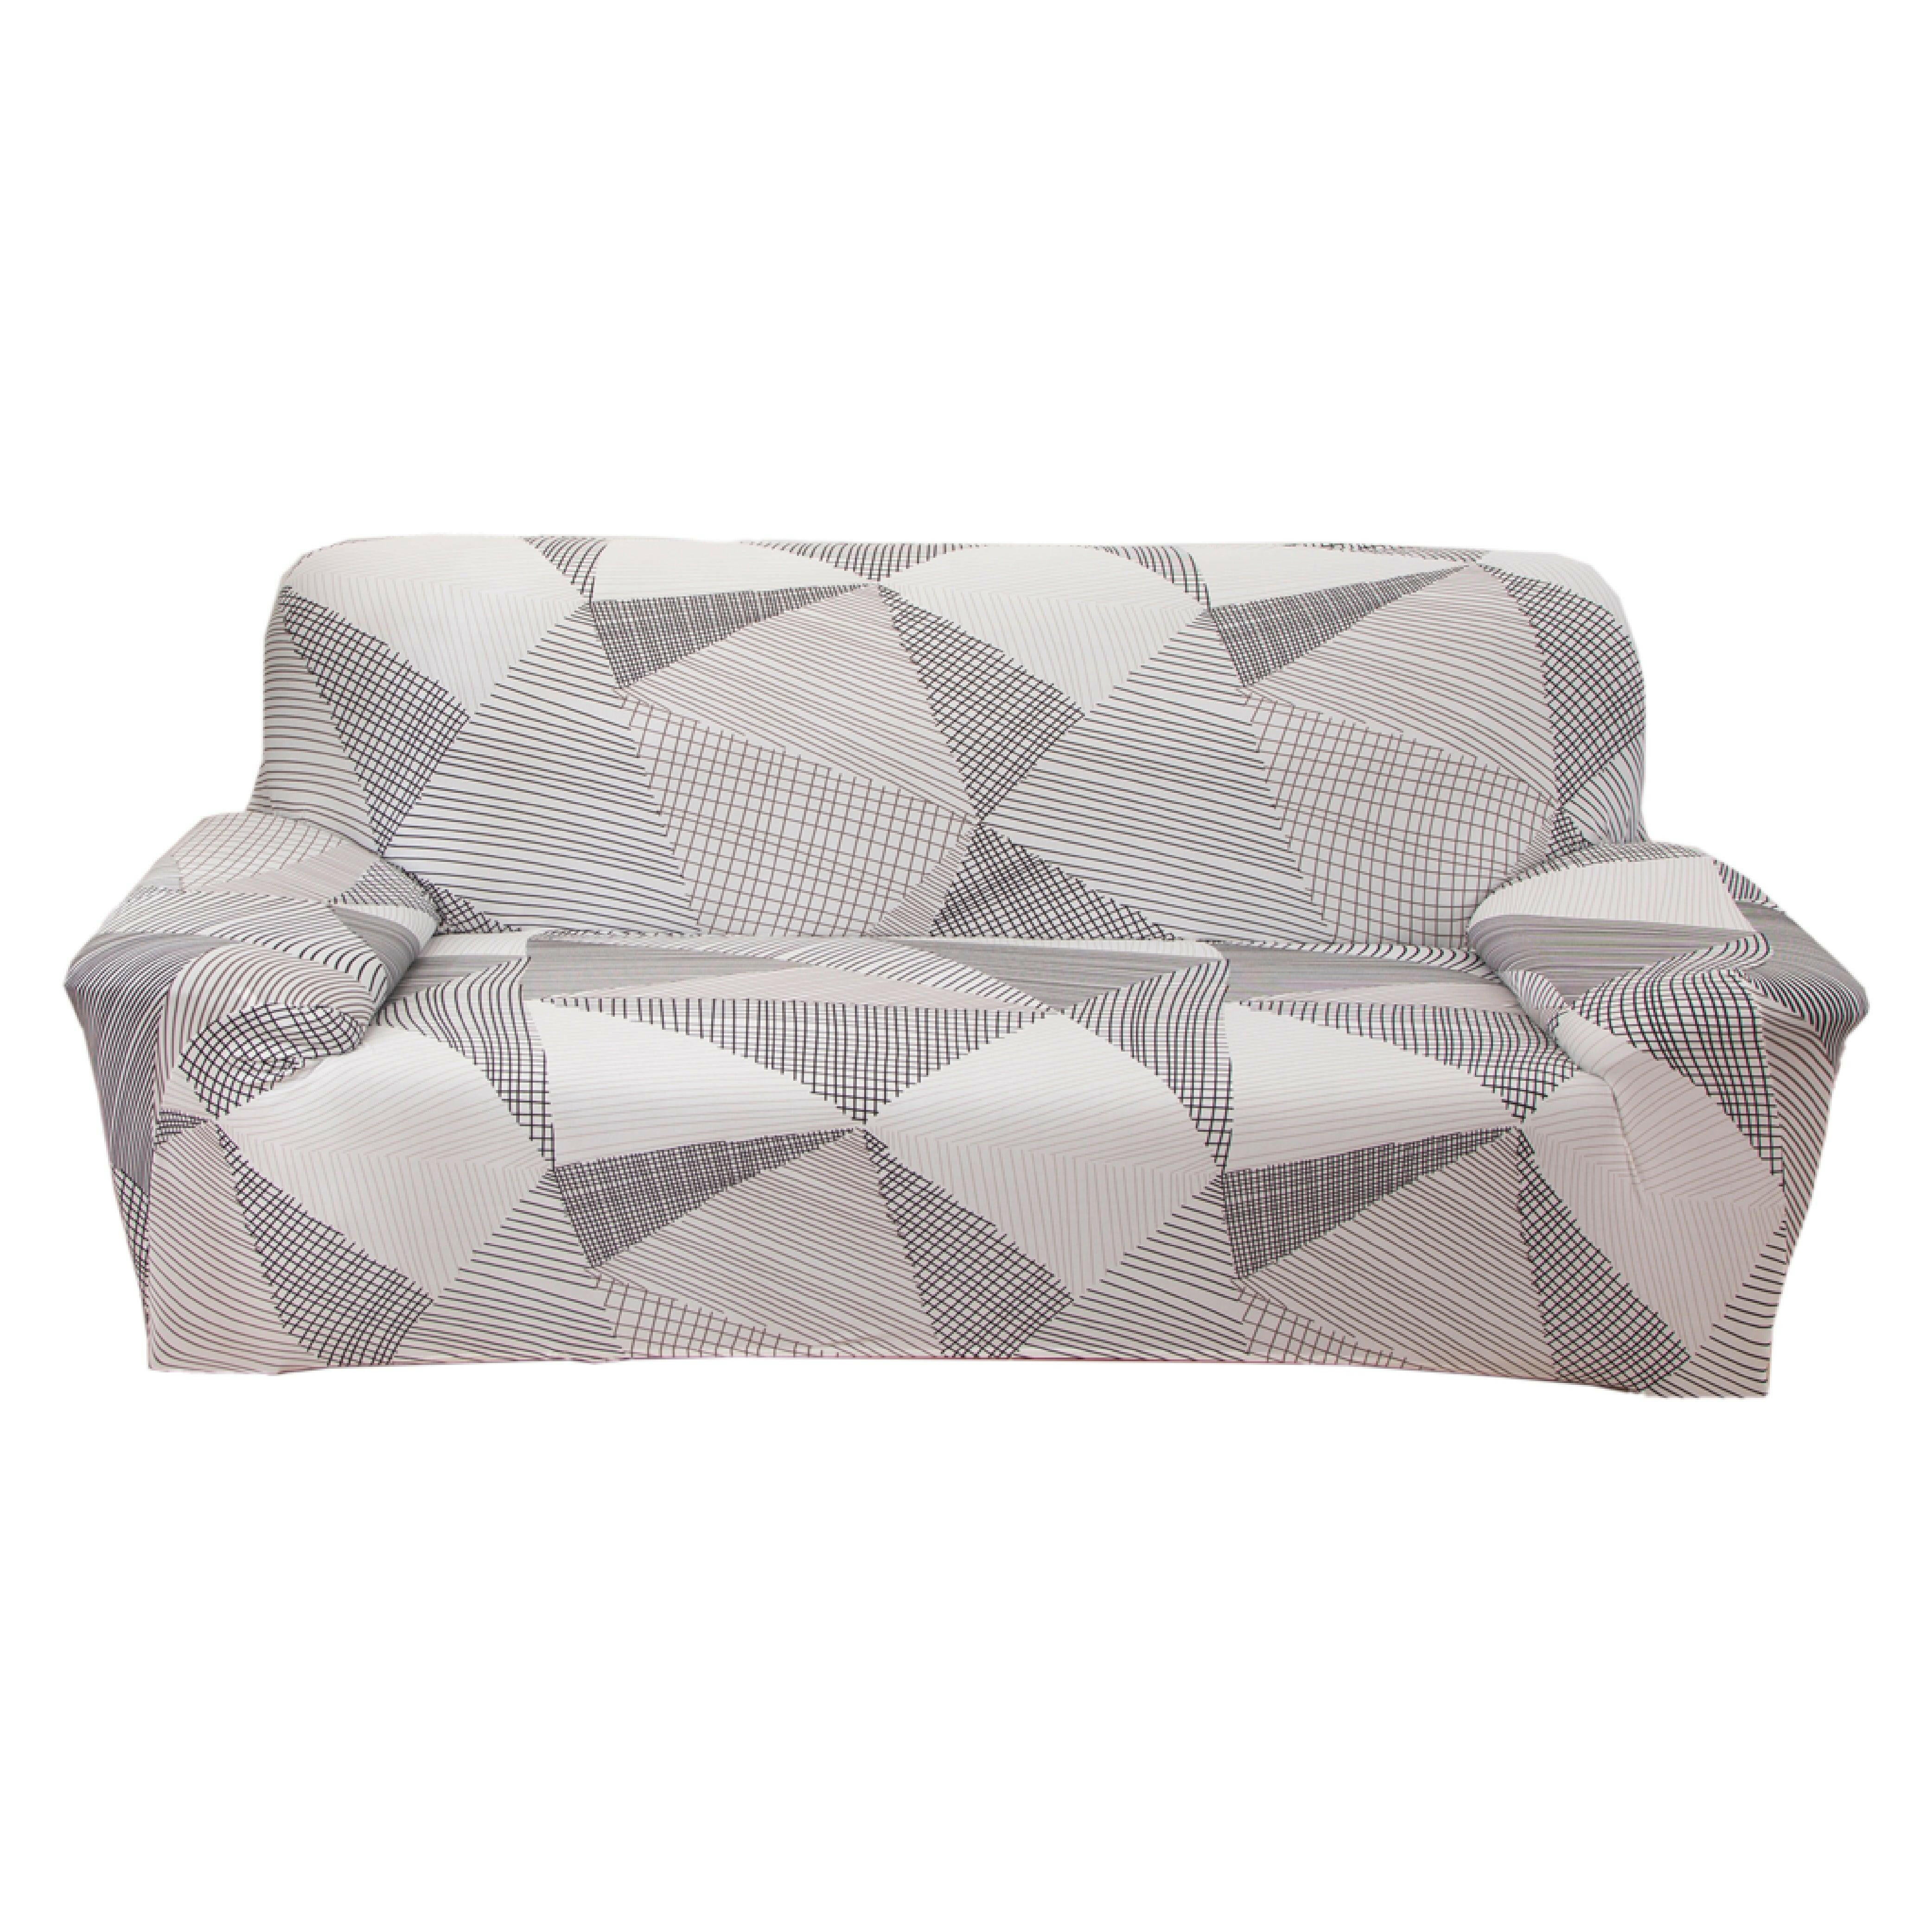 Hyper Cover Stretch Sofa Cover with Patterns Geometric | Sofa Covers | Brilliant Home Living